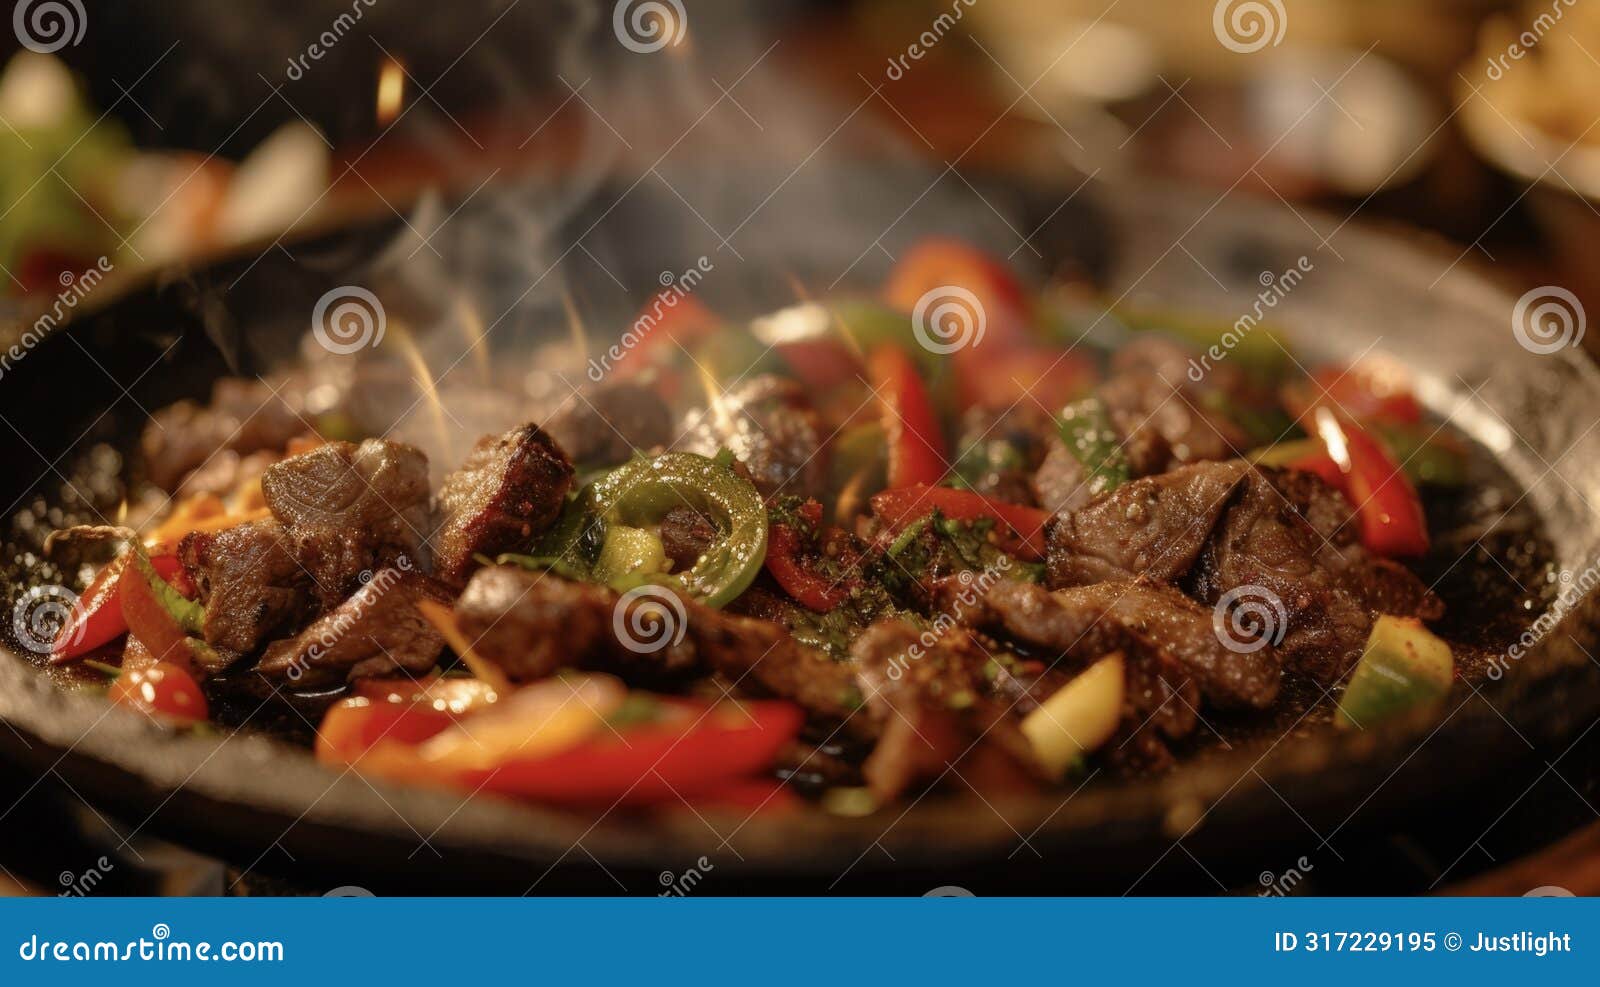 the unmistakable sound of meat sizzling on a hot platter pairs perfectly with the y aroma of texmex seasonings. juicy